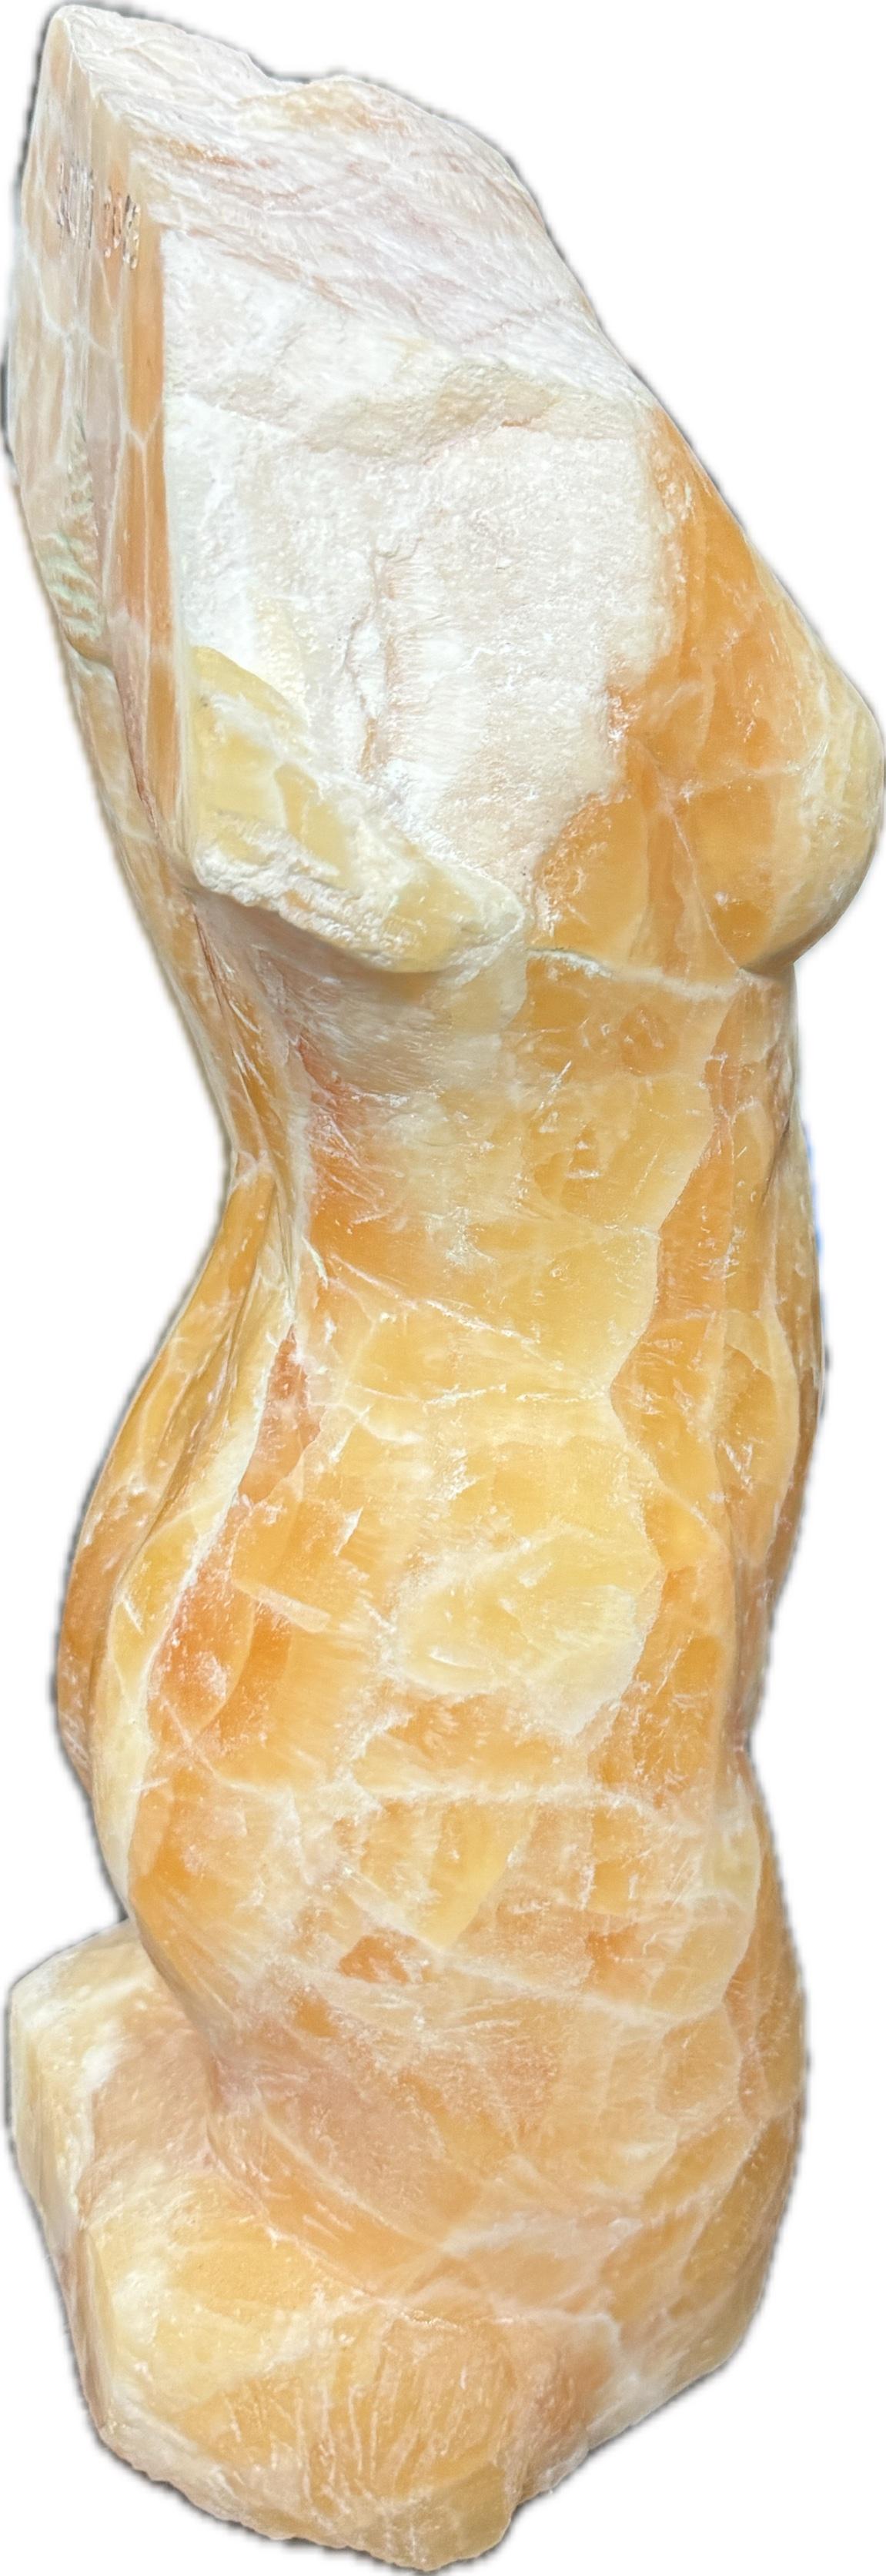 Nude, Sculpture, Natural Haney Onyx Stone, Handmade by Garo For Sale 3